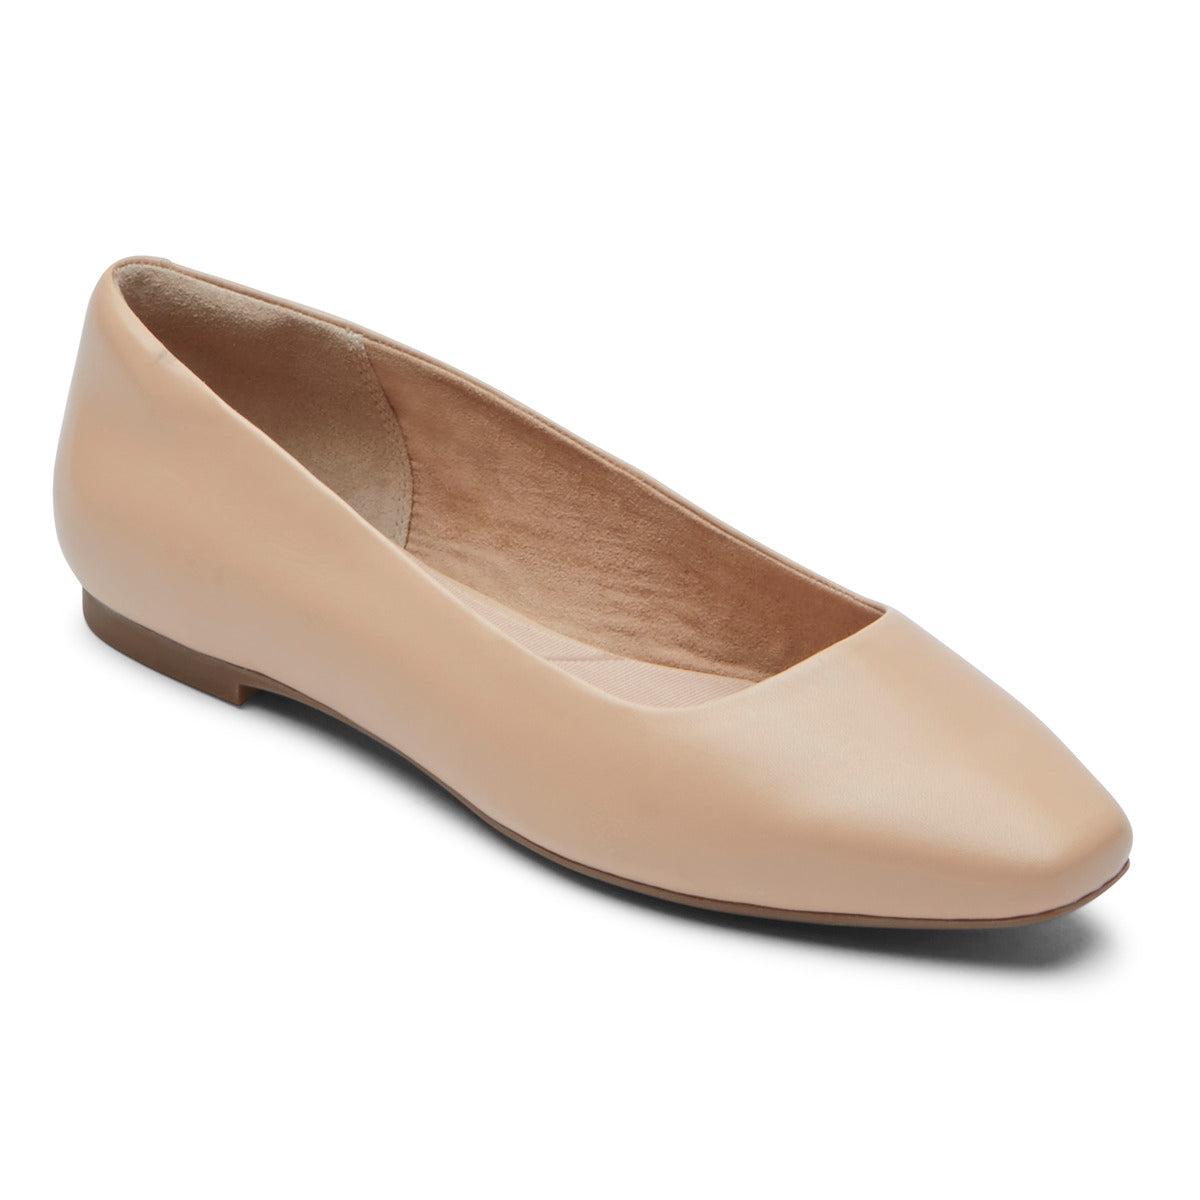 Rockport S Total Motion Laylani Plain Ballet Flat in Natural | Lyst